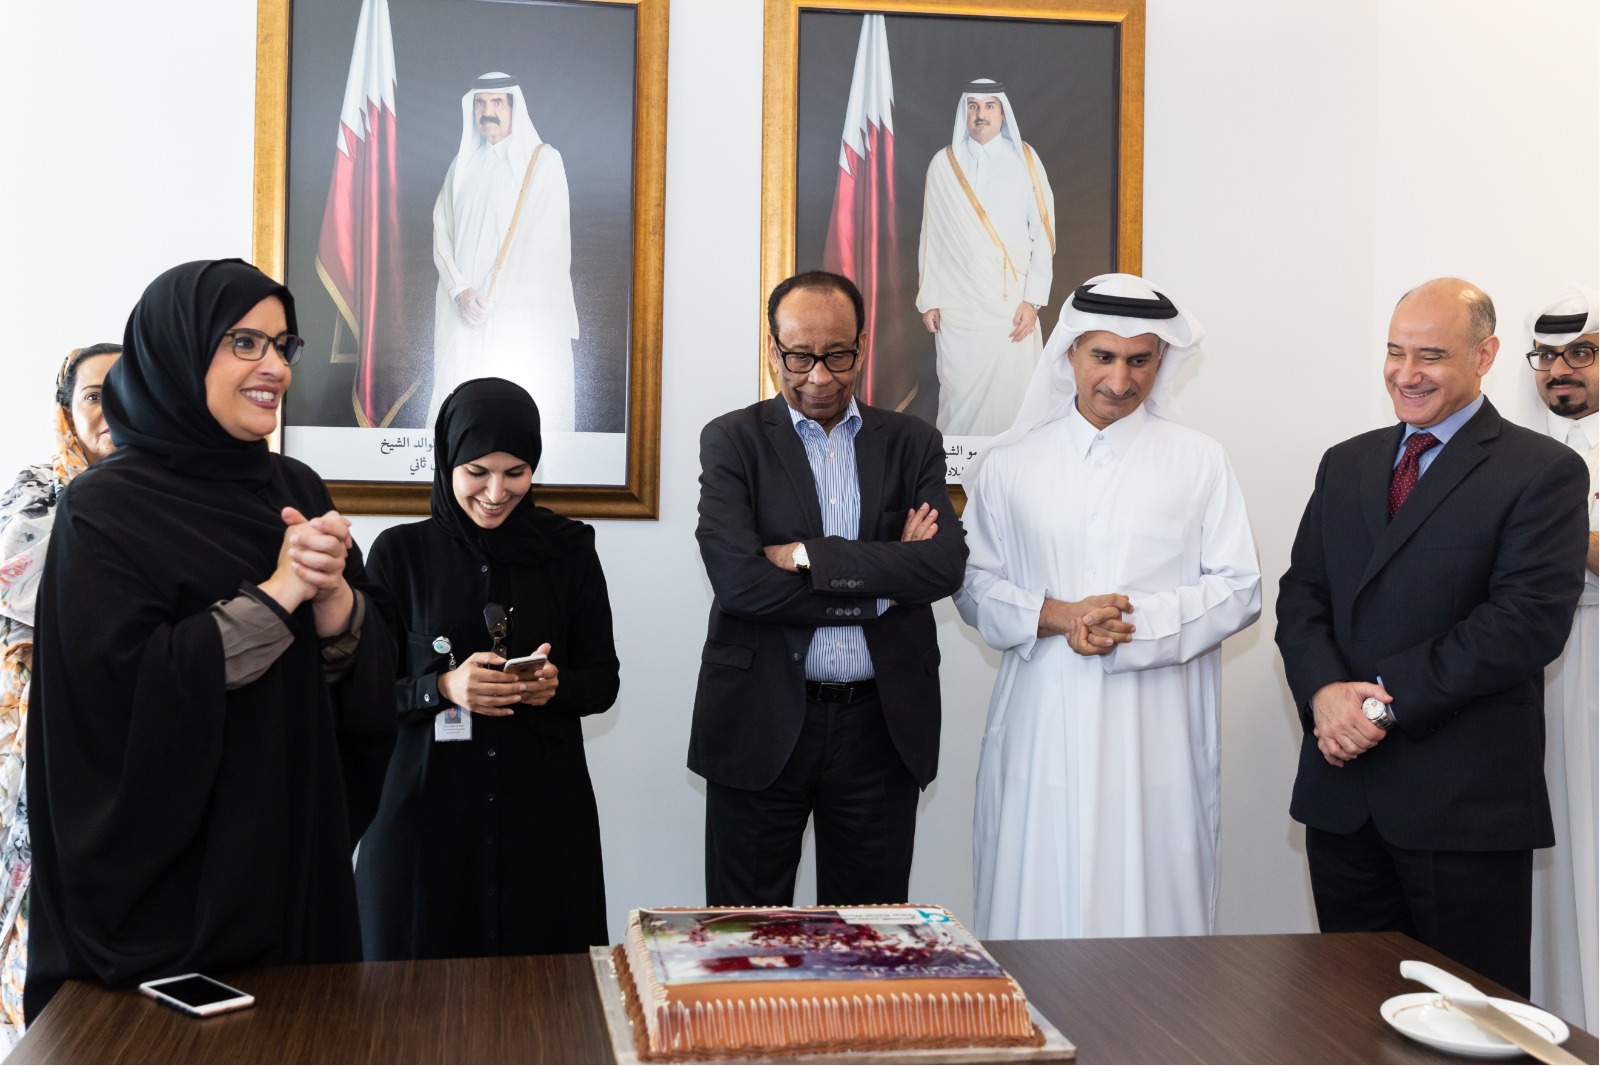 QSW and its staff celebrate the winning of Qatar’s National football team the AFC Asian Cup championship